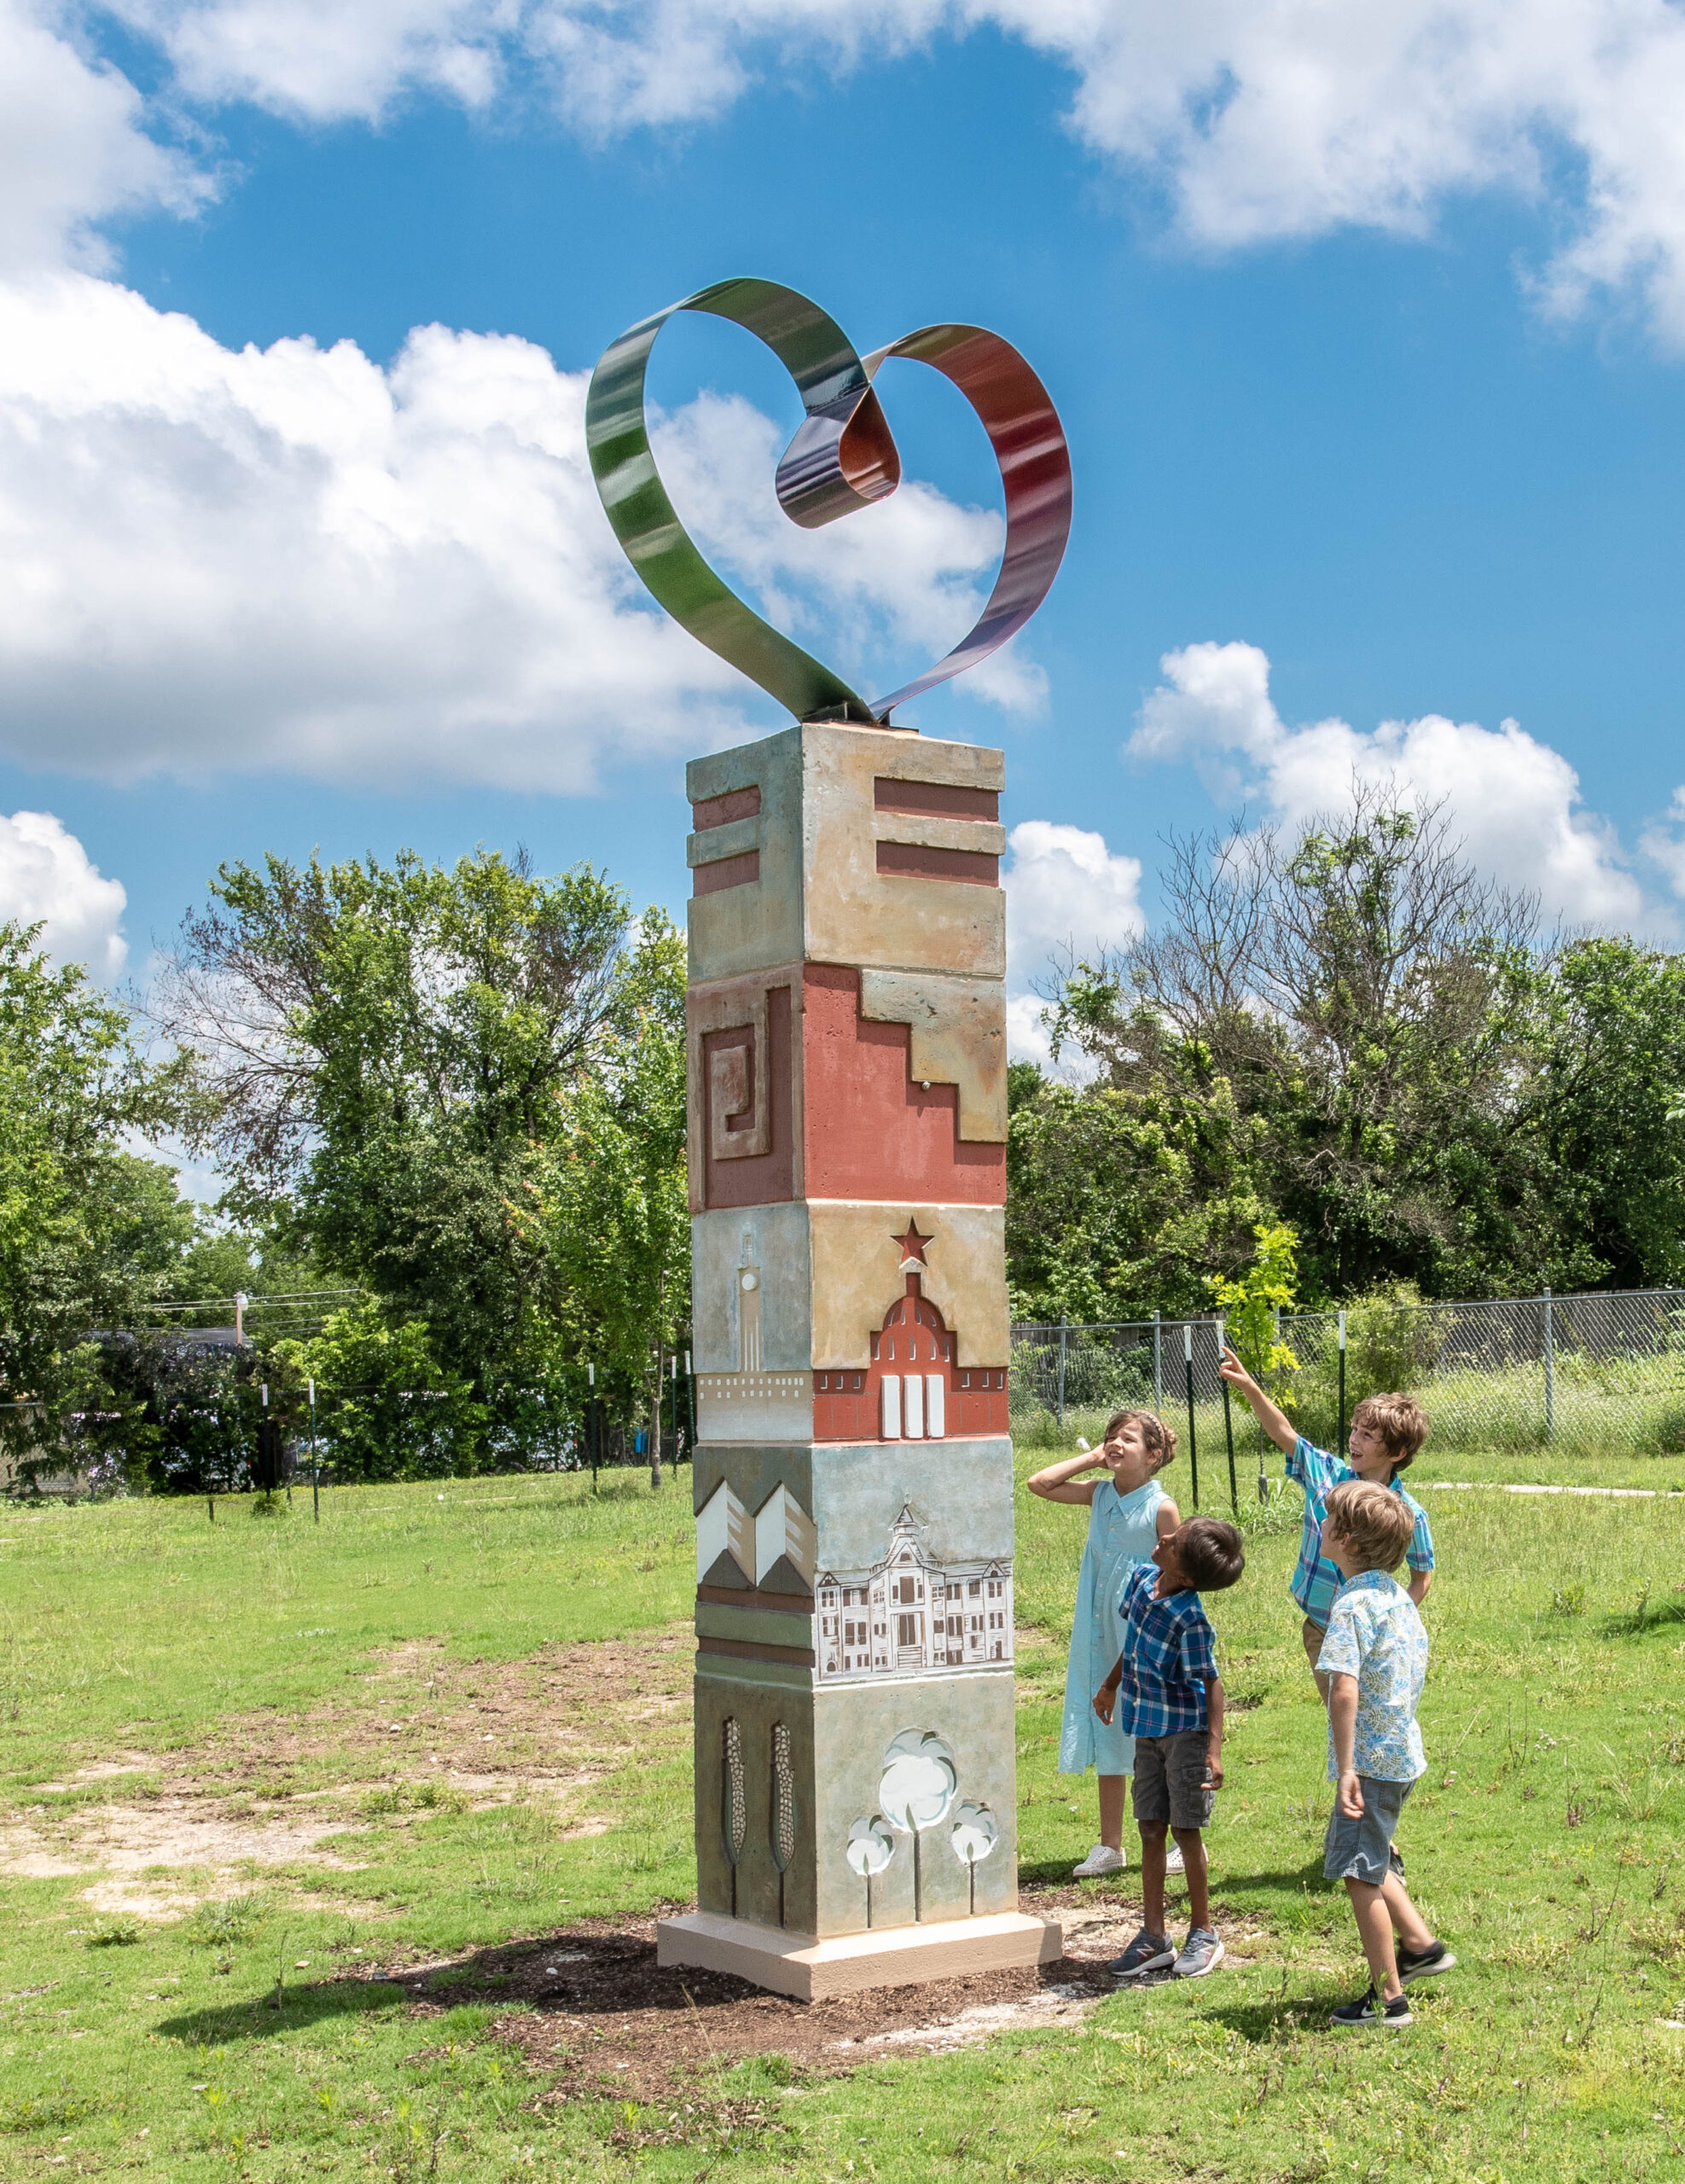 Photograph of the St. John Community Pillar sculpture with children pointing at it in a park.